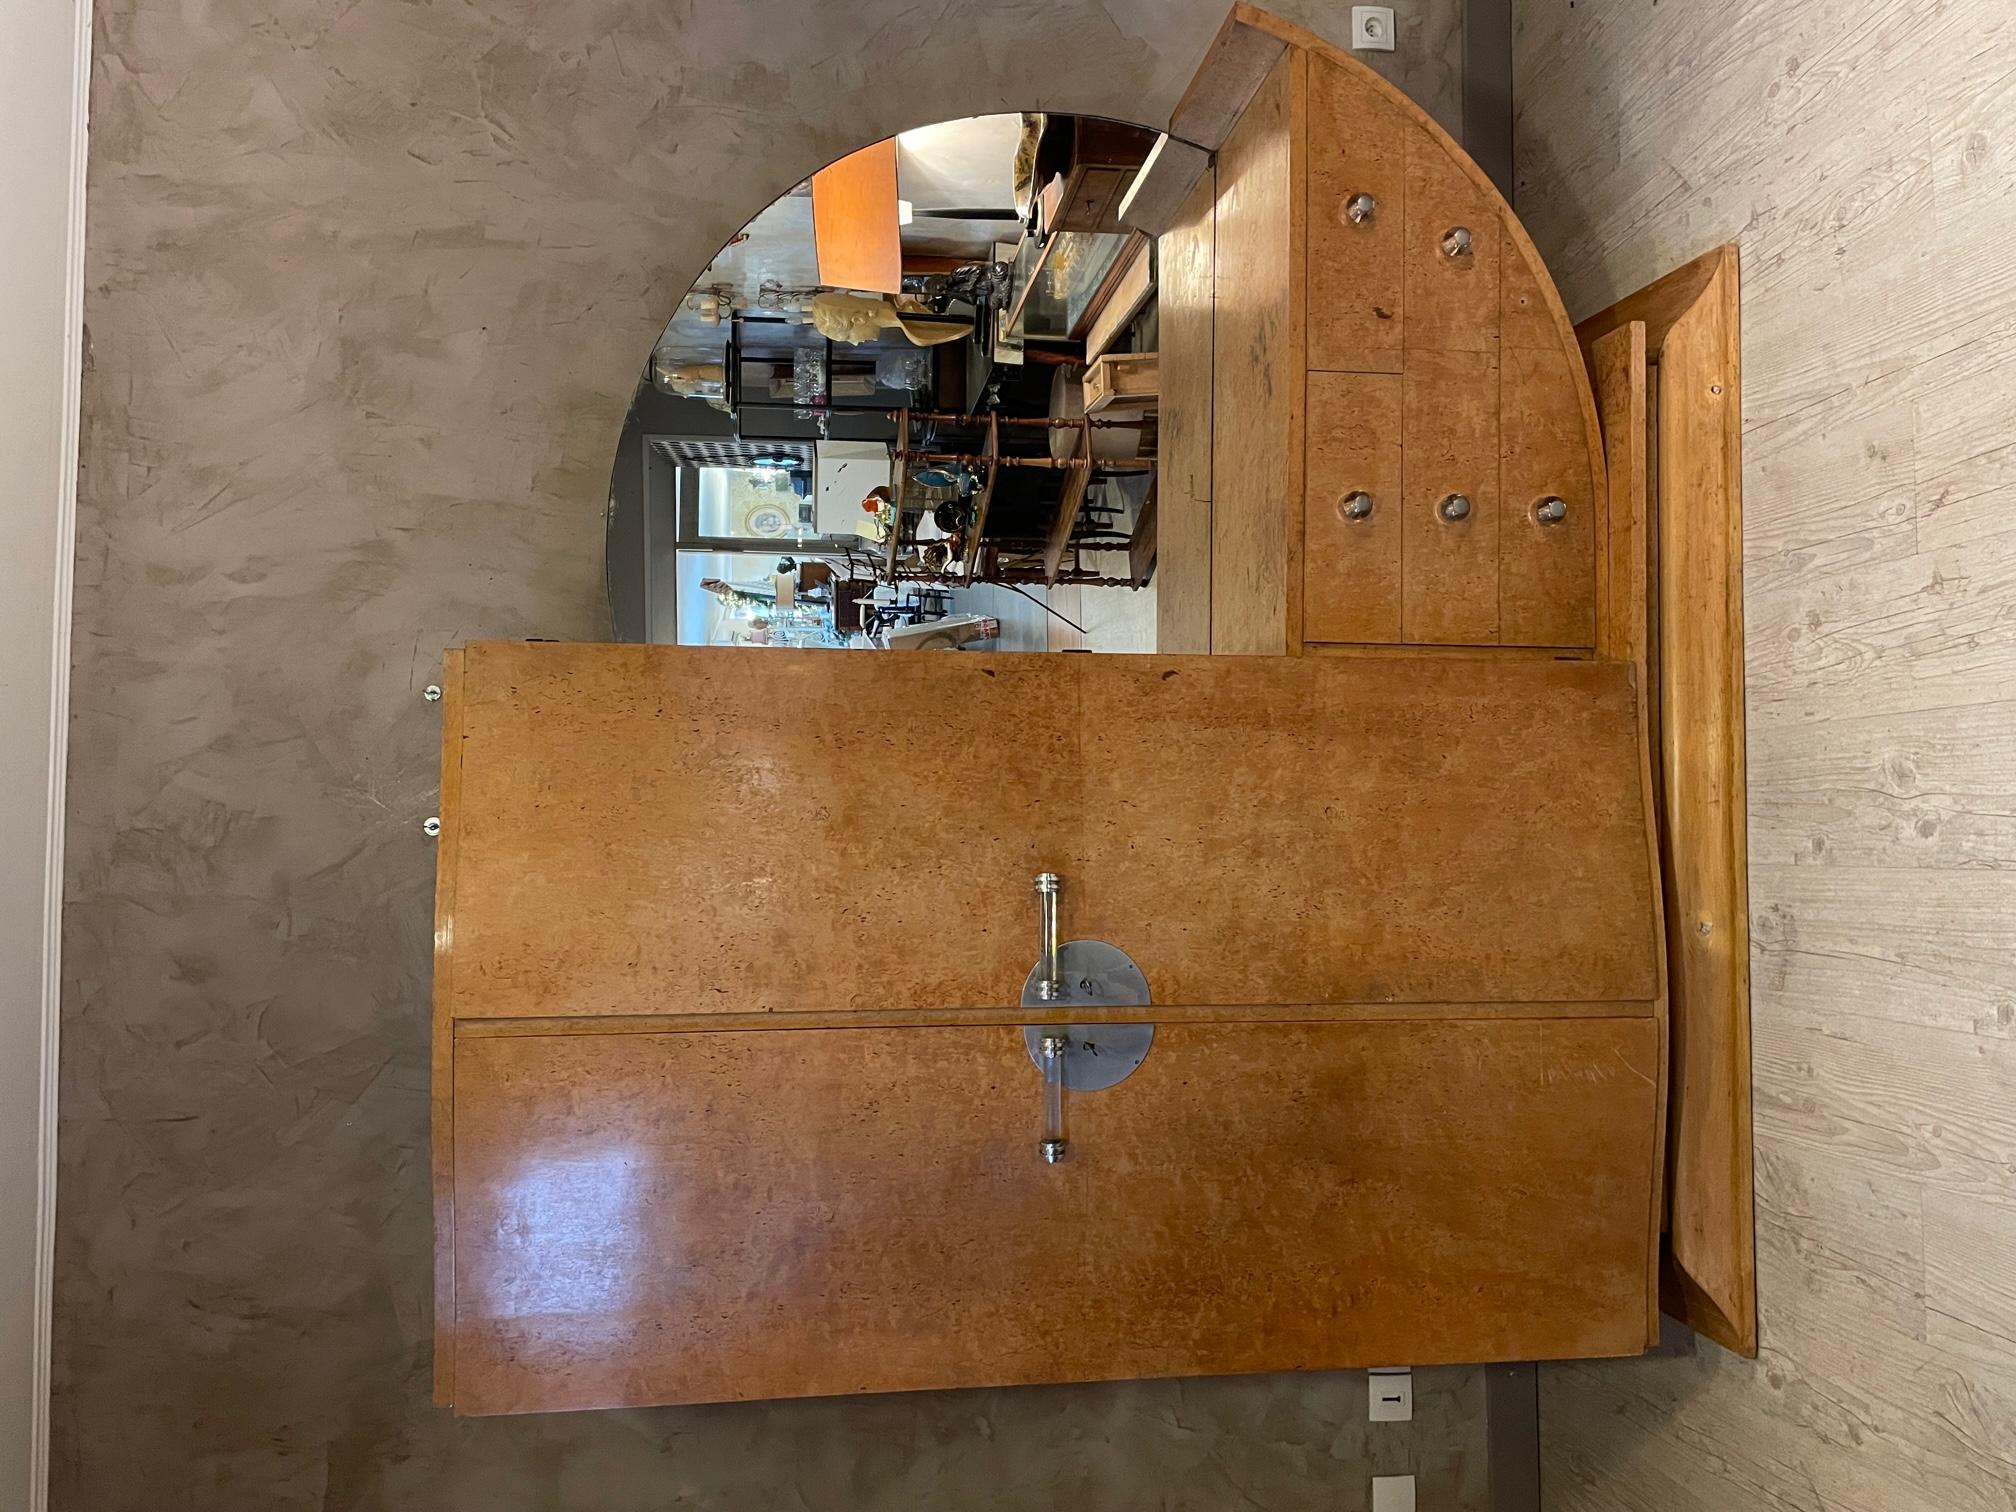 Very nice Art deco Birdseye maple wardrobe from the 1930s. 
On the left side, there are two doors with beautiful glass and chromed metal handles opening on a wardrobe and many shelves. 
On the right side, we can see a large rounded mirror and three